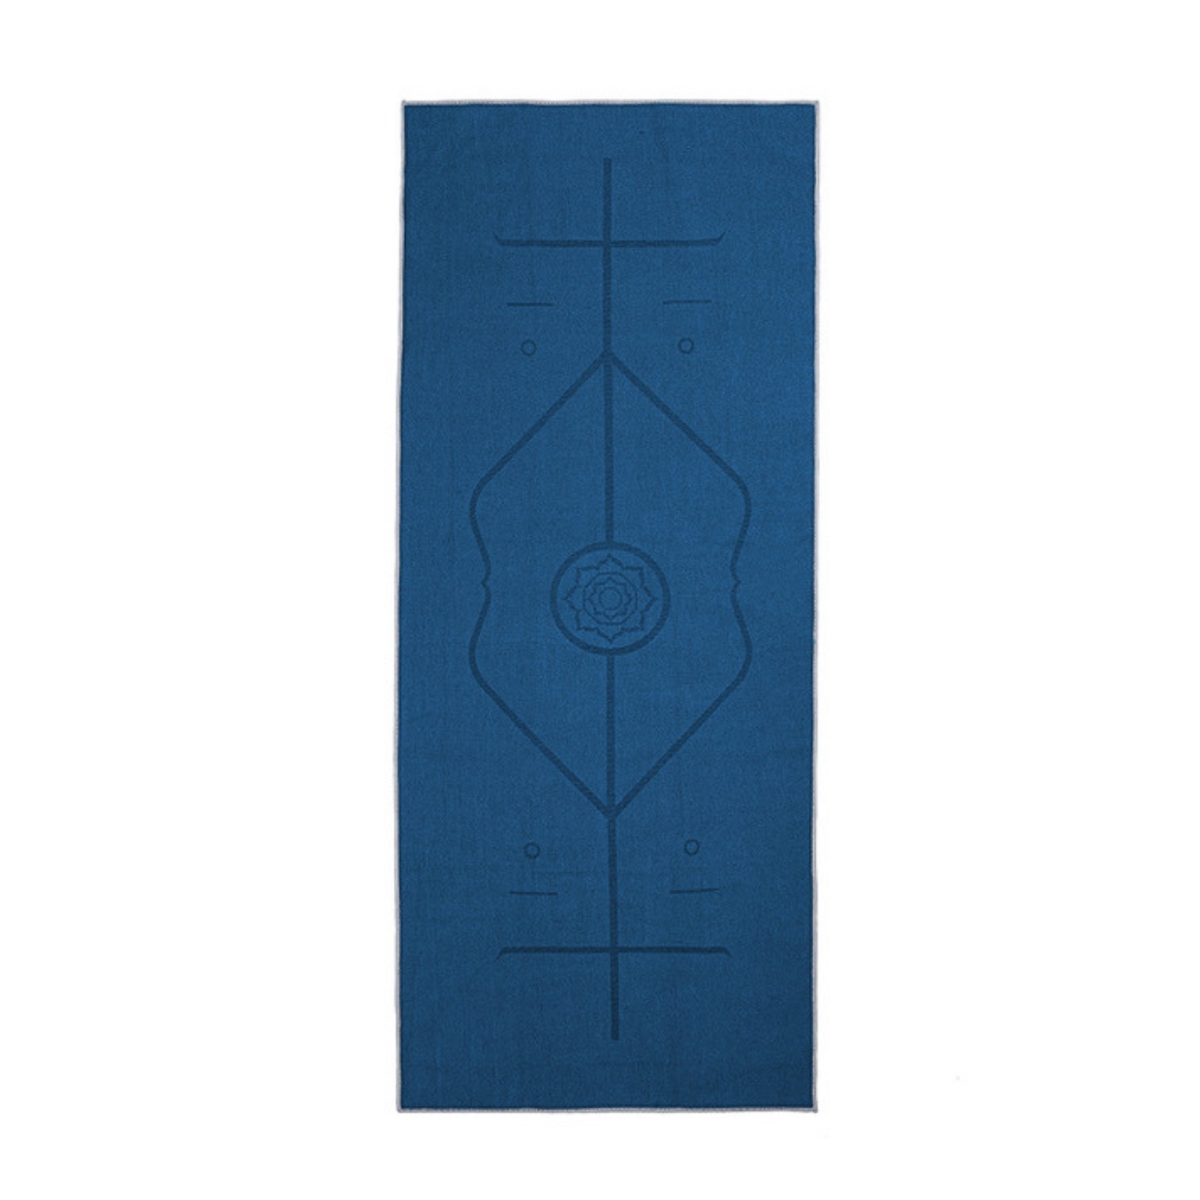 Picture of JupiterGear JG-YOGATWL-ALIGN-BLU Yoga Mat Towel with Slip-Resistant Fabric and Posture Alignment Lines - Blue